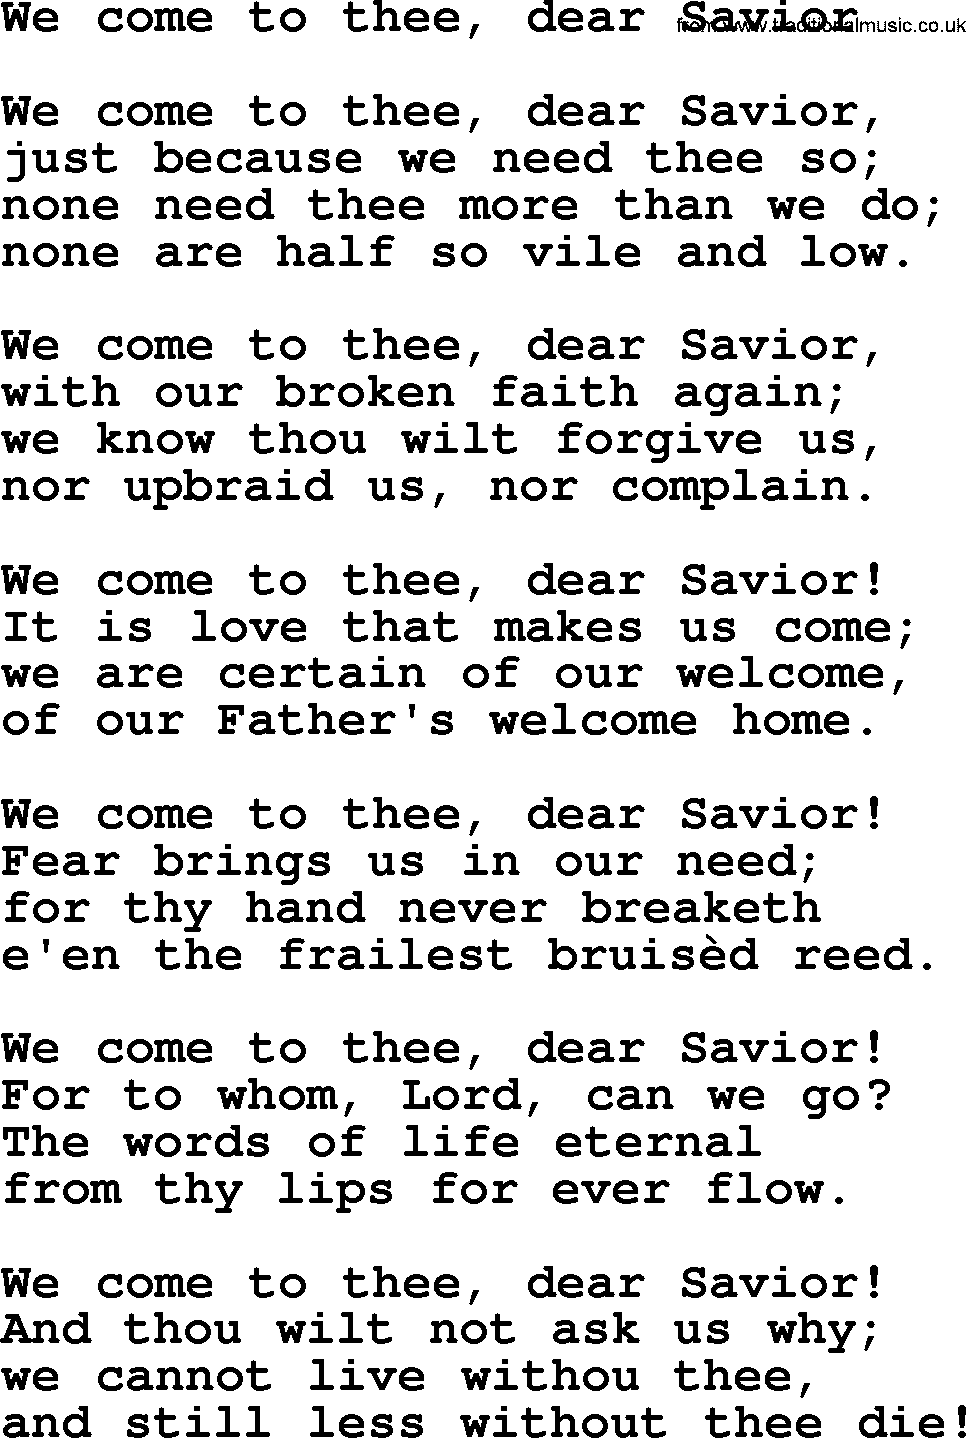 Christmas Hymns, Carols and Songs, title: We Come To Thee, Dear Savior, lyrics with PDF